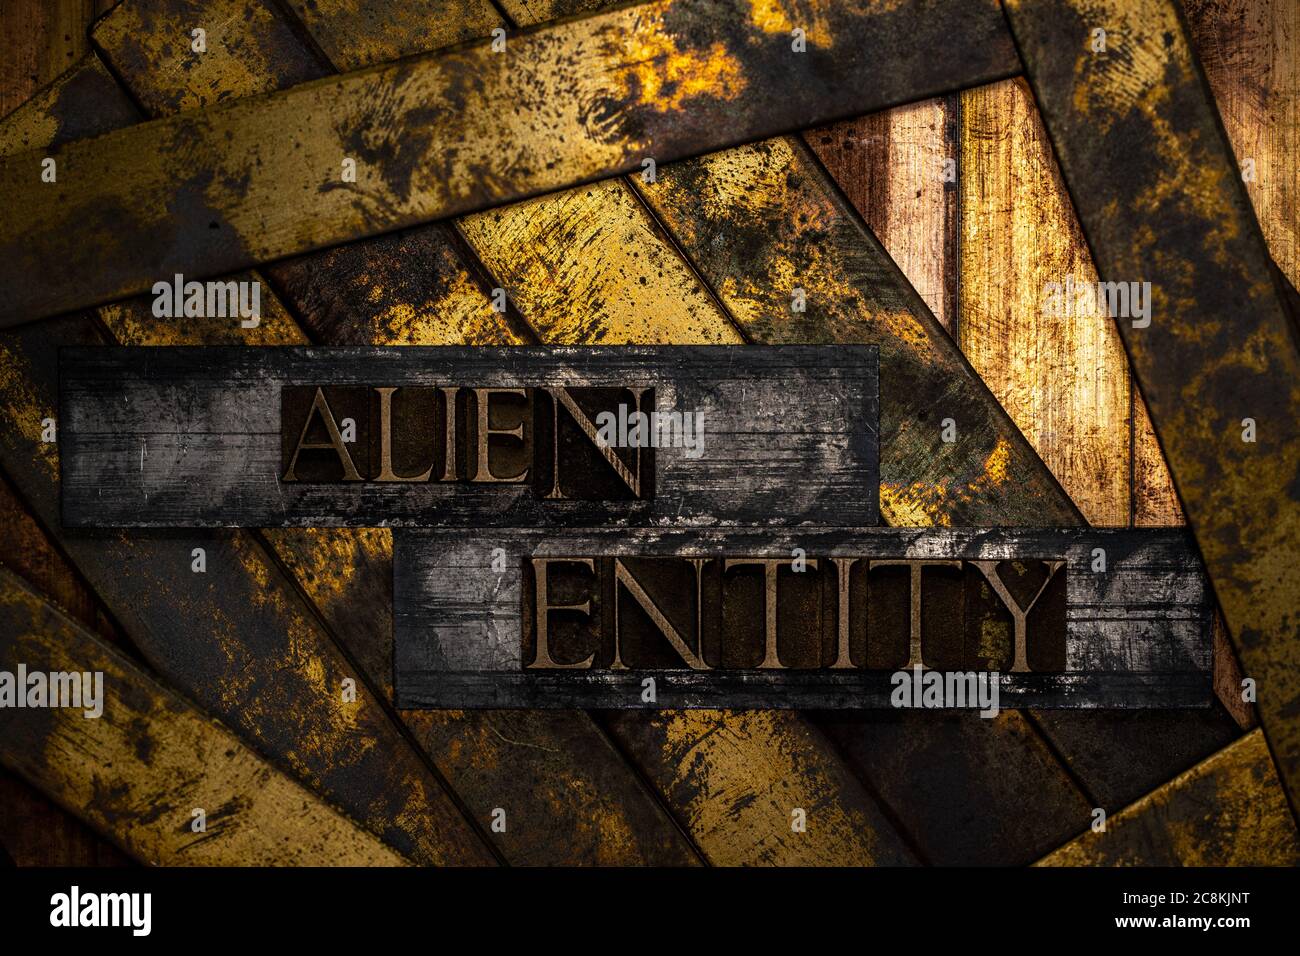 Alien Entity text formed with real authentic typeset letters on vintage textured silver grunge copper and gold background Stock Photo